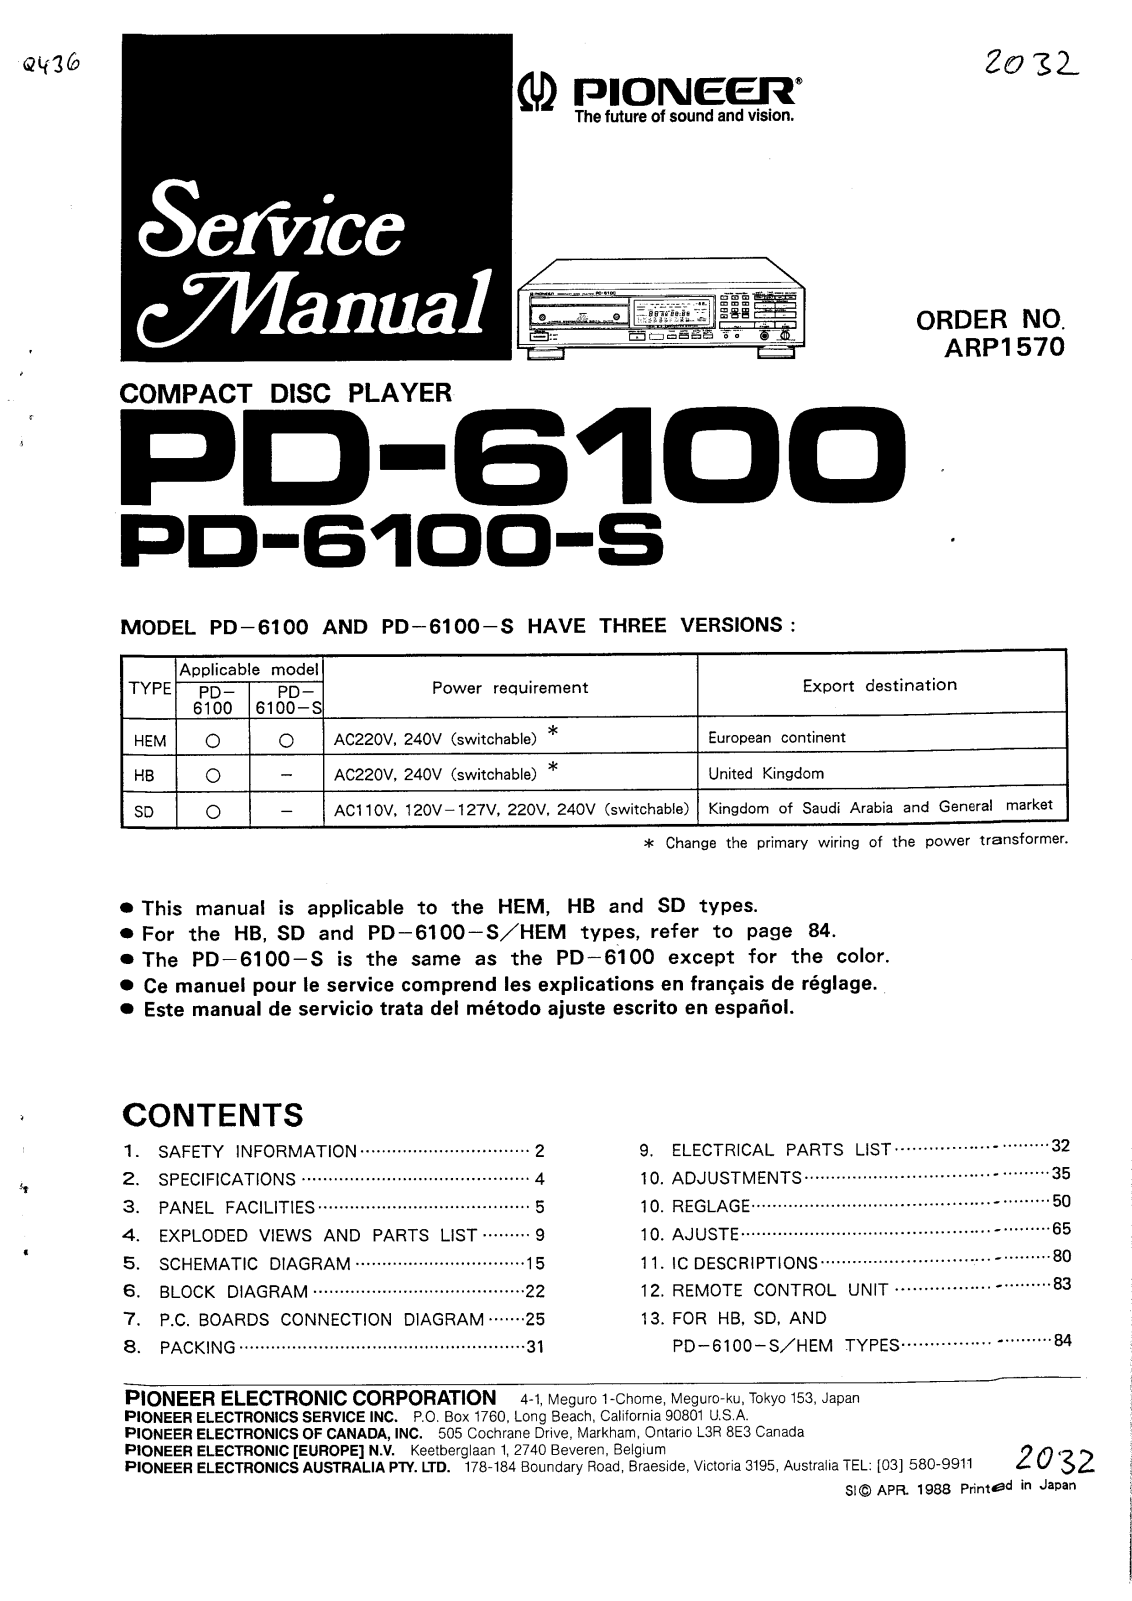 Pioneer PD-6100, PD-6100-S Service manual